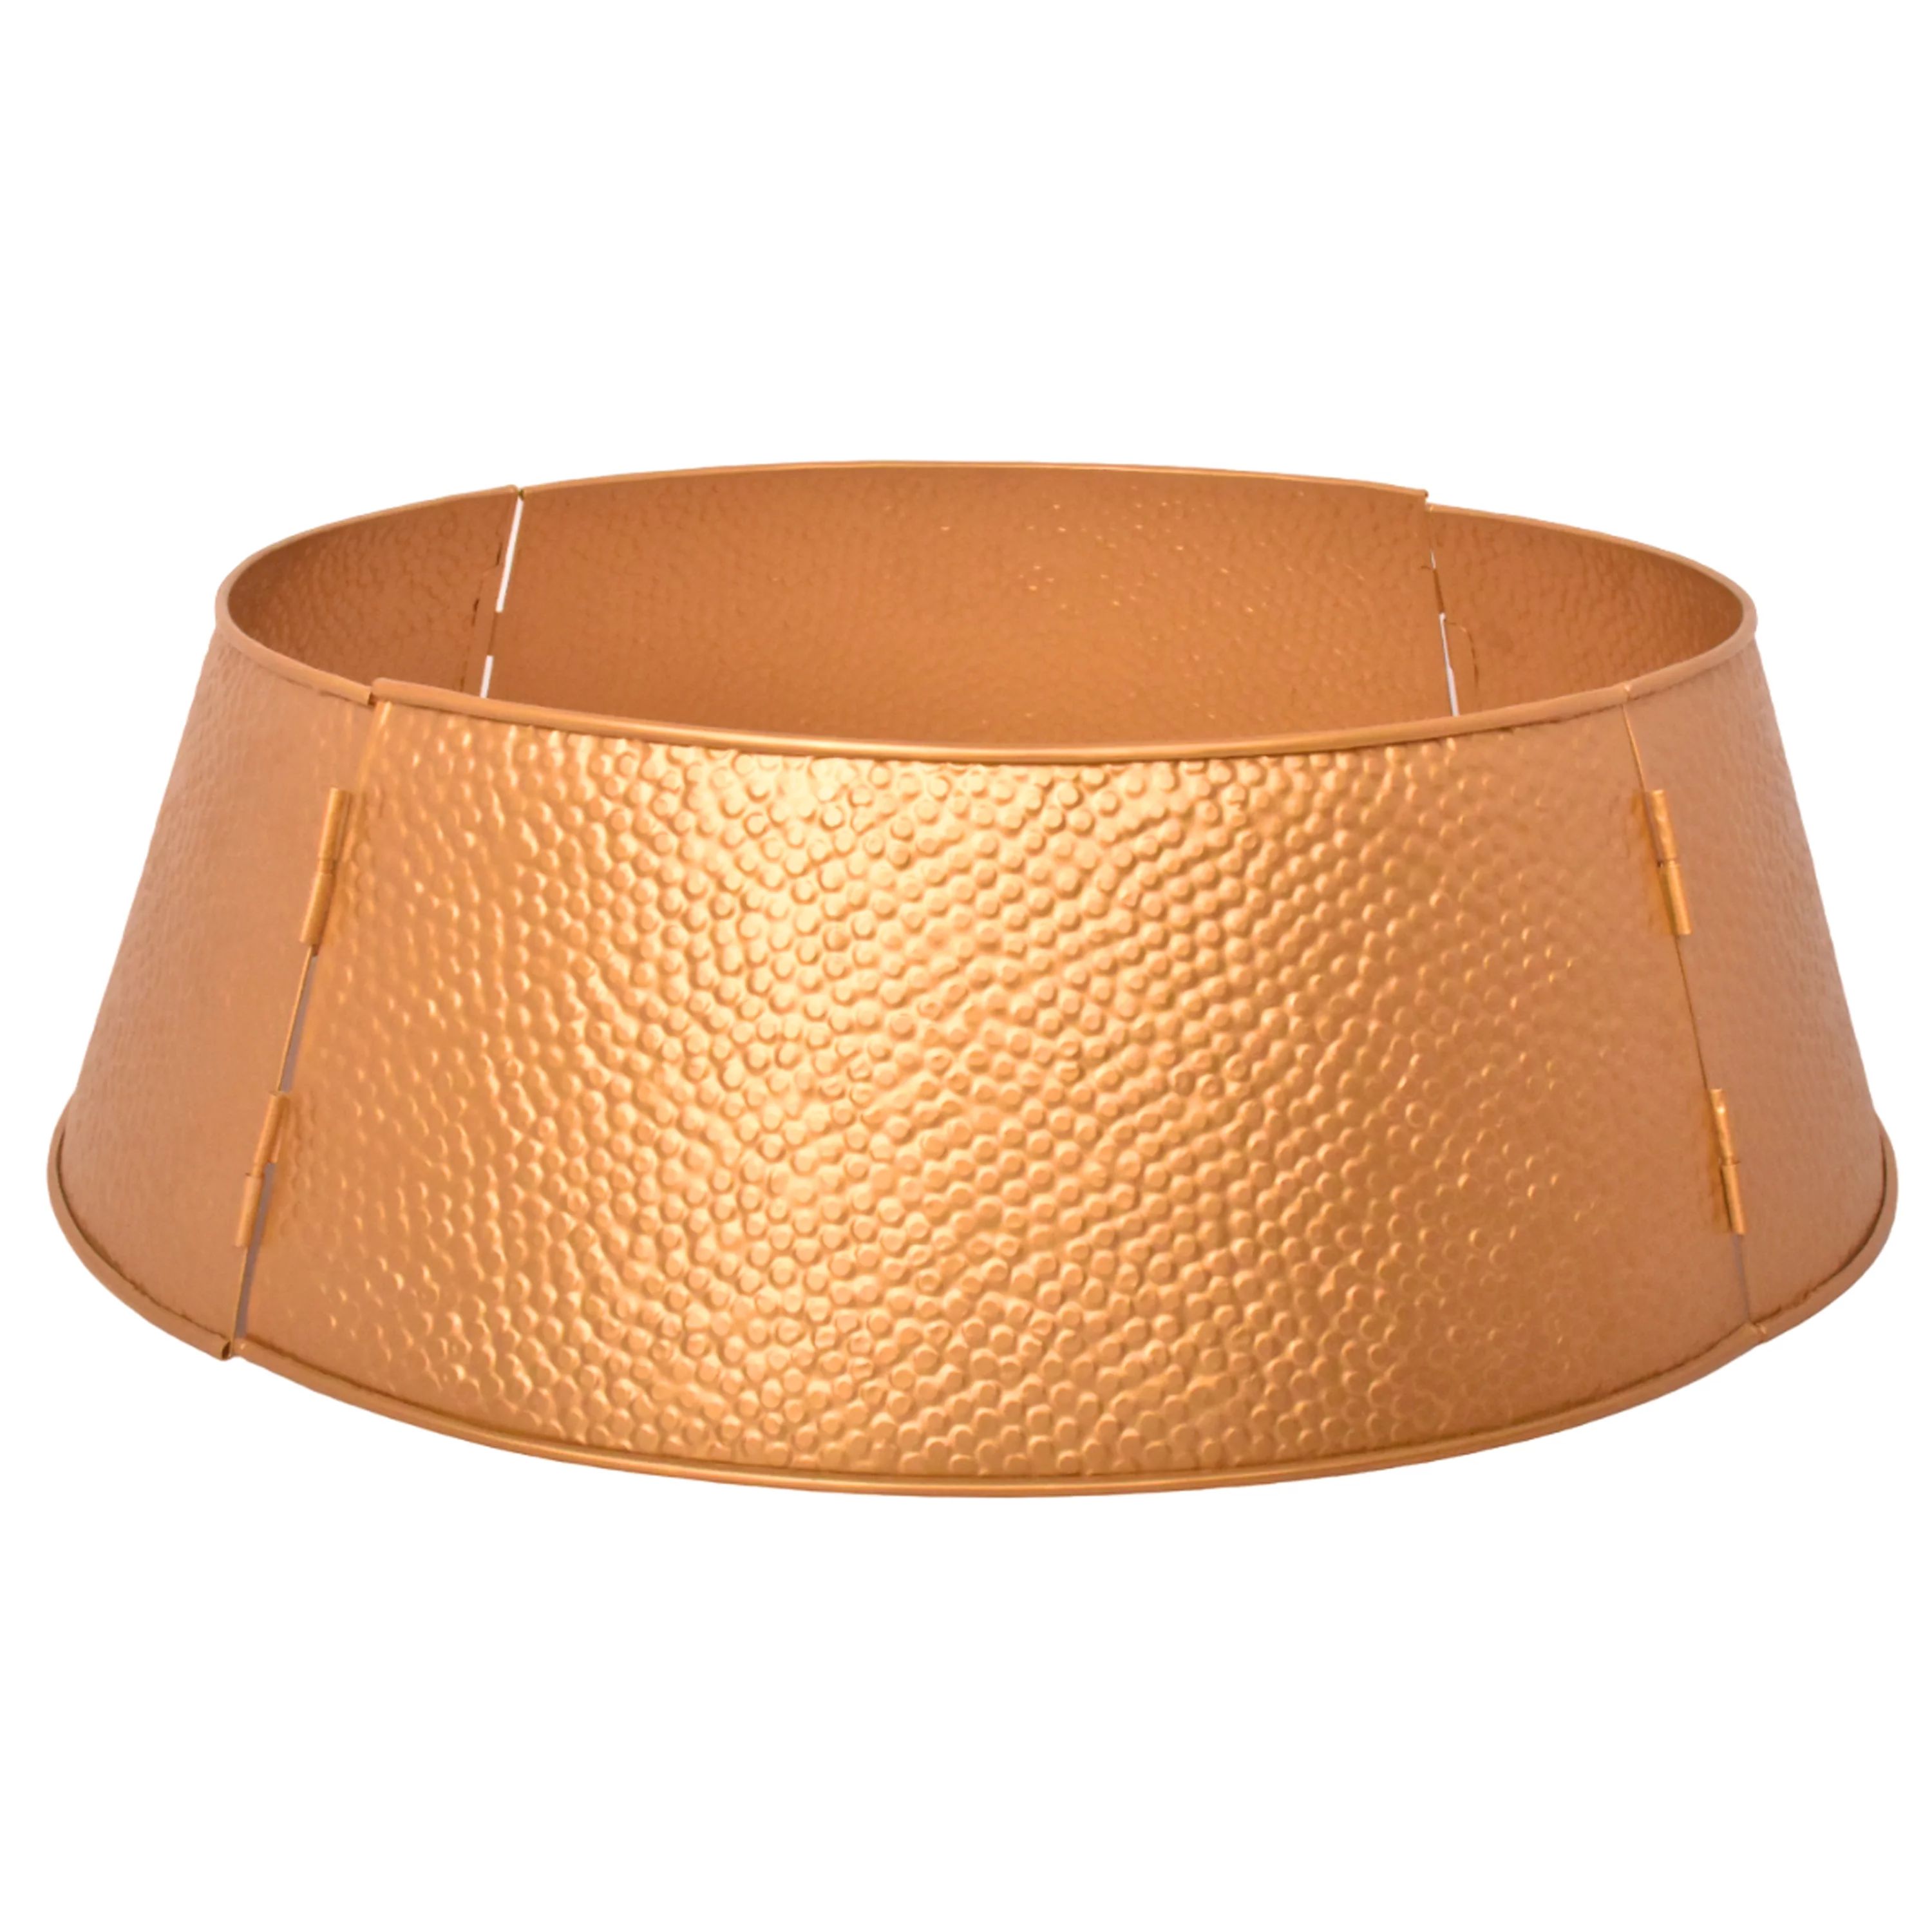 Gold Metal Honeycomb Hammered Tree Collar, 27 in x 27 in x 8 in, by Holiday Time | Walmart (US)